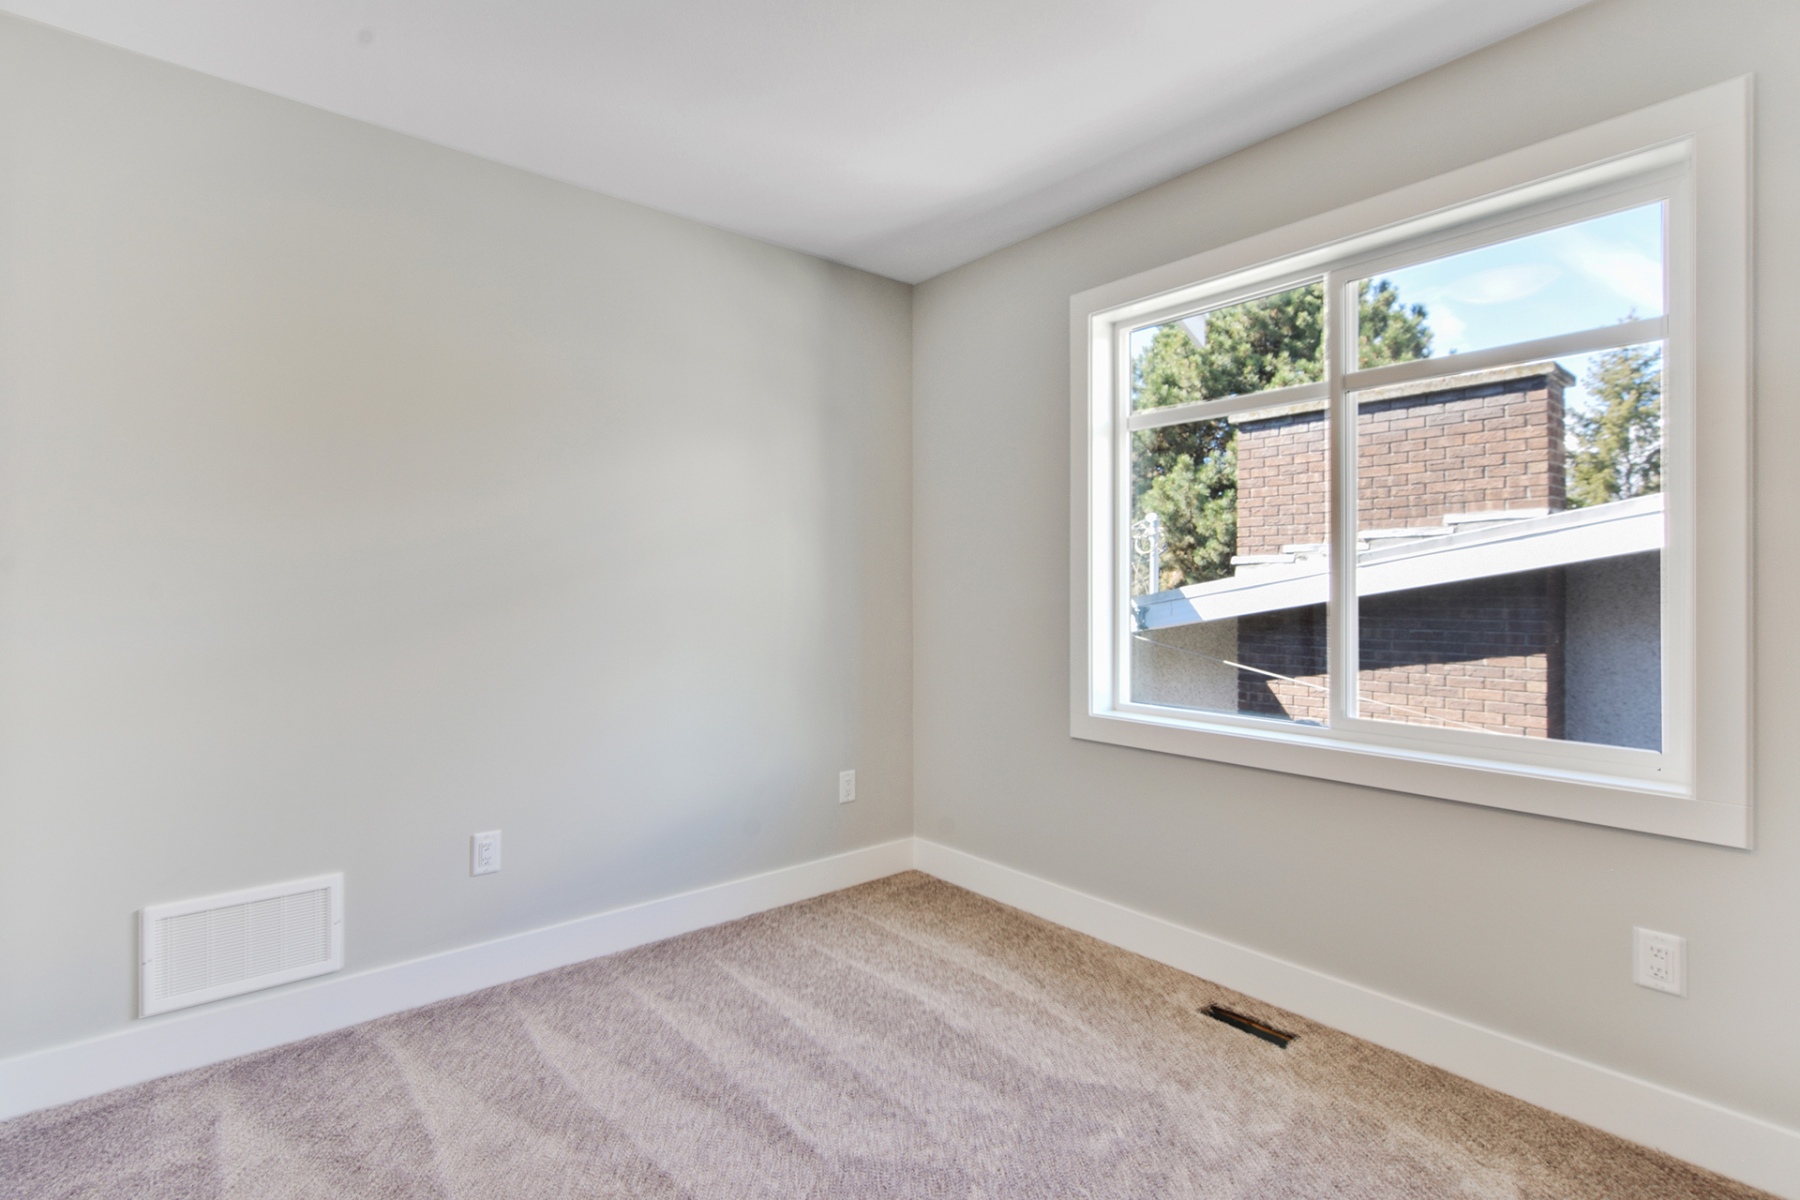 1_harmony_homes_glenwood_infill_project_empty_room_gallery_image_27